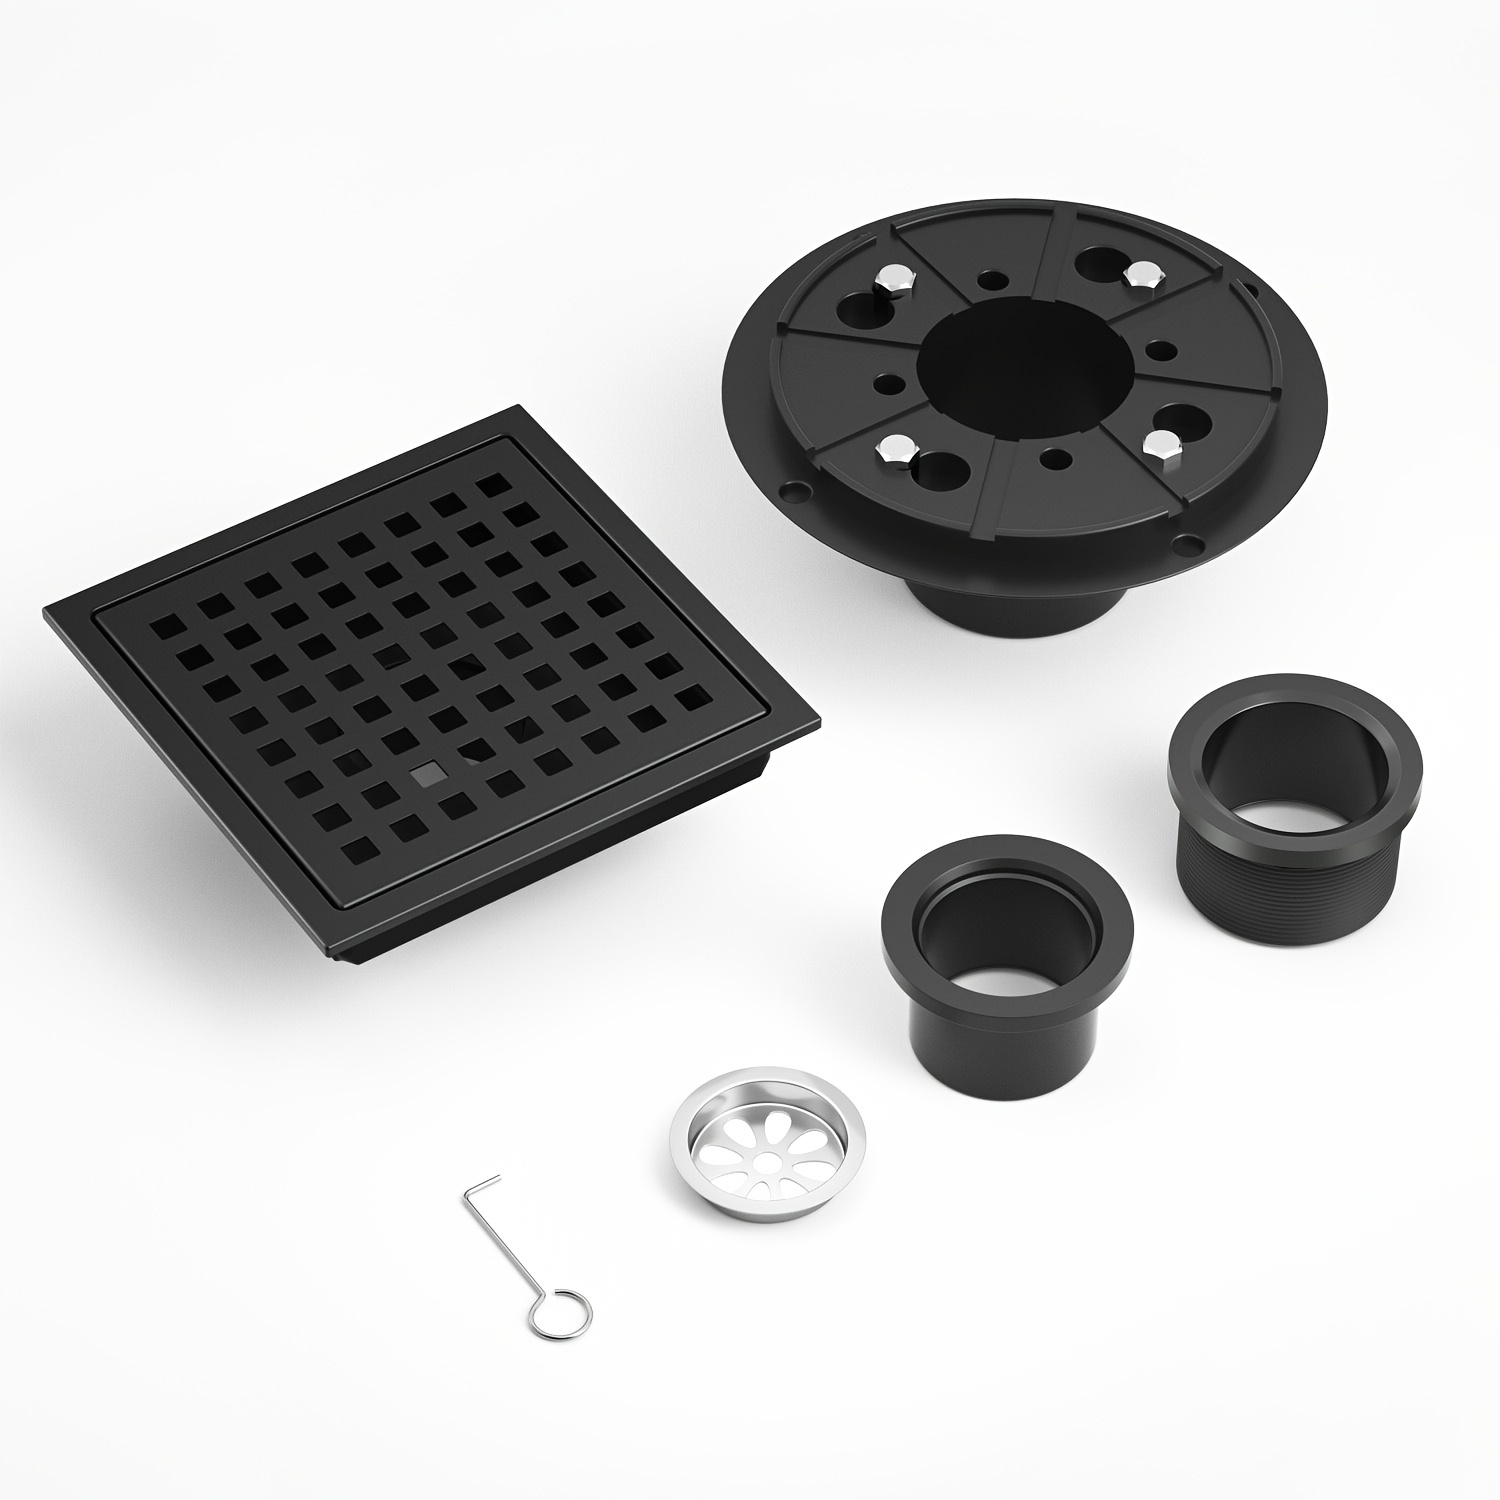 4 inch Matte Black Square Shower Drain with Hair Trap Set (3 Designs)